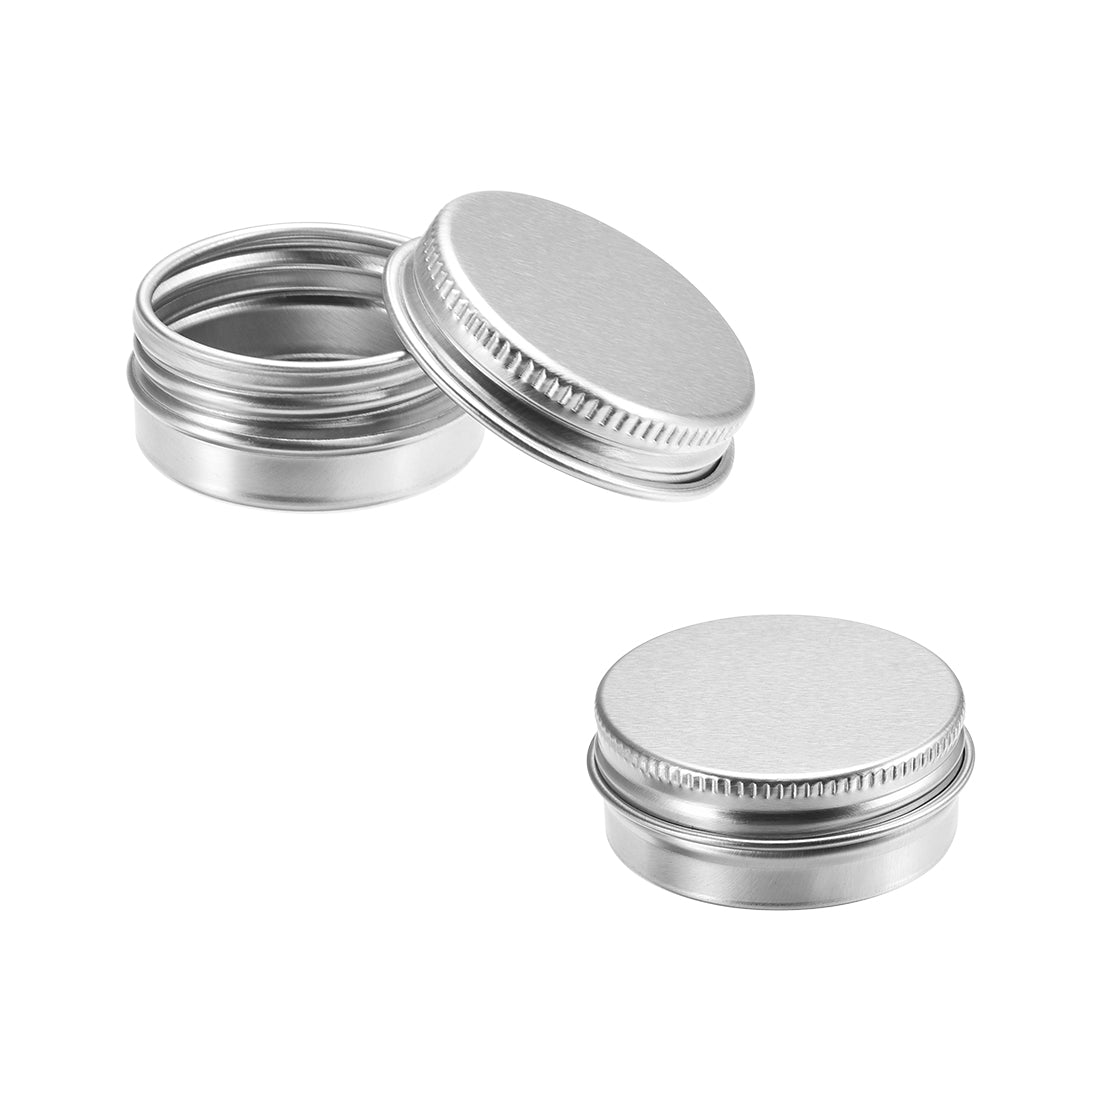 uxcell Uxcell 0.33 oz Round Aluminum Cans Tin Can Screw Top Metal Lid Containers 1ml, 6pcs